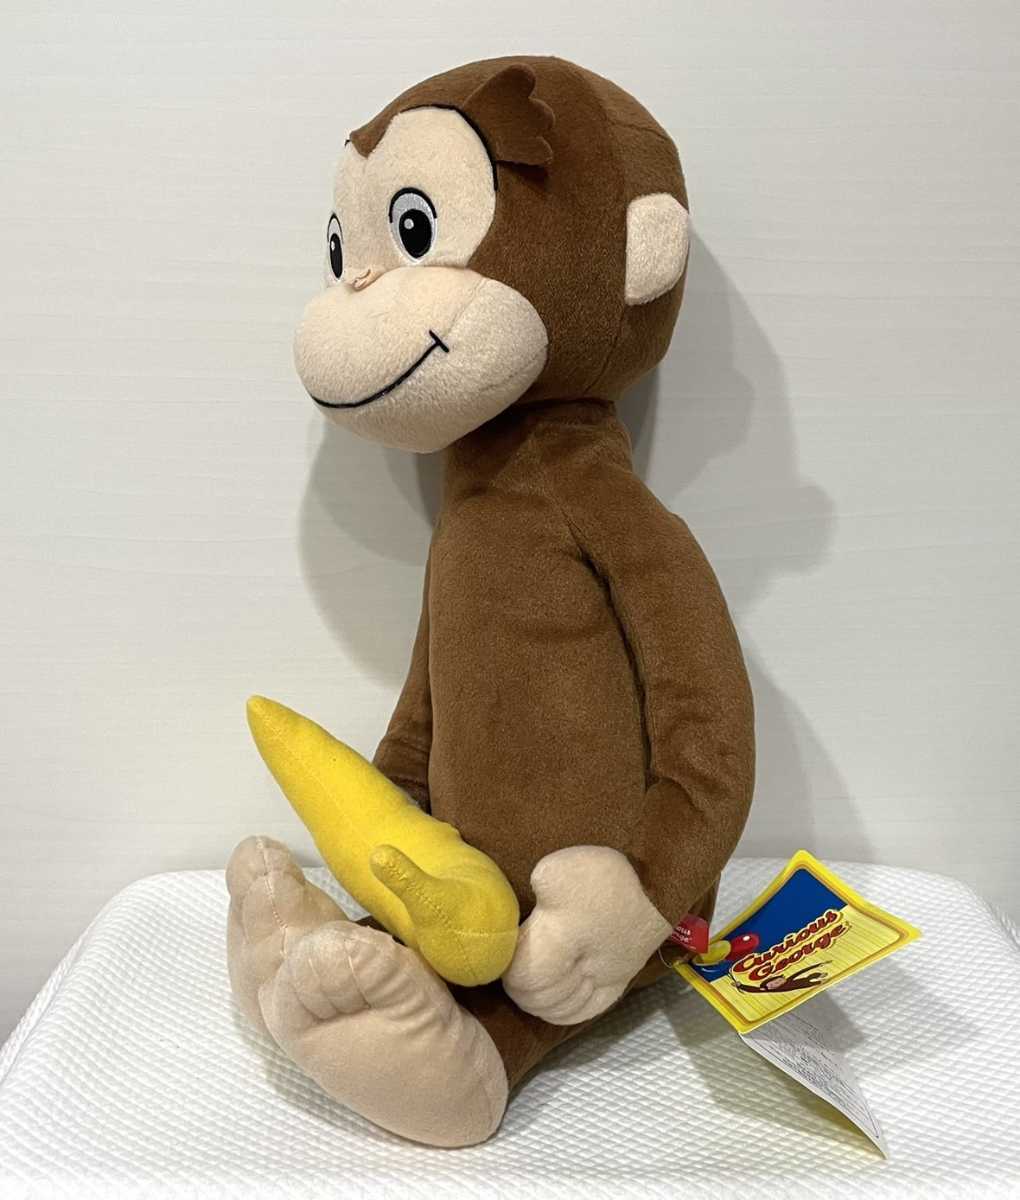 [.... George ] mega jumbo banana large liking! soft toy all 1 kind tag equipped seat height approximately 40cm Sega BIG soft toy PW